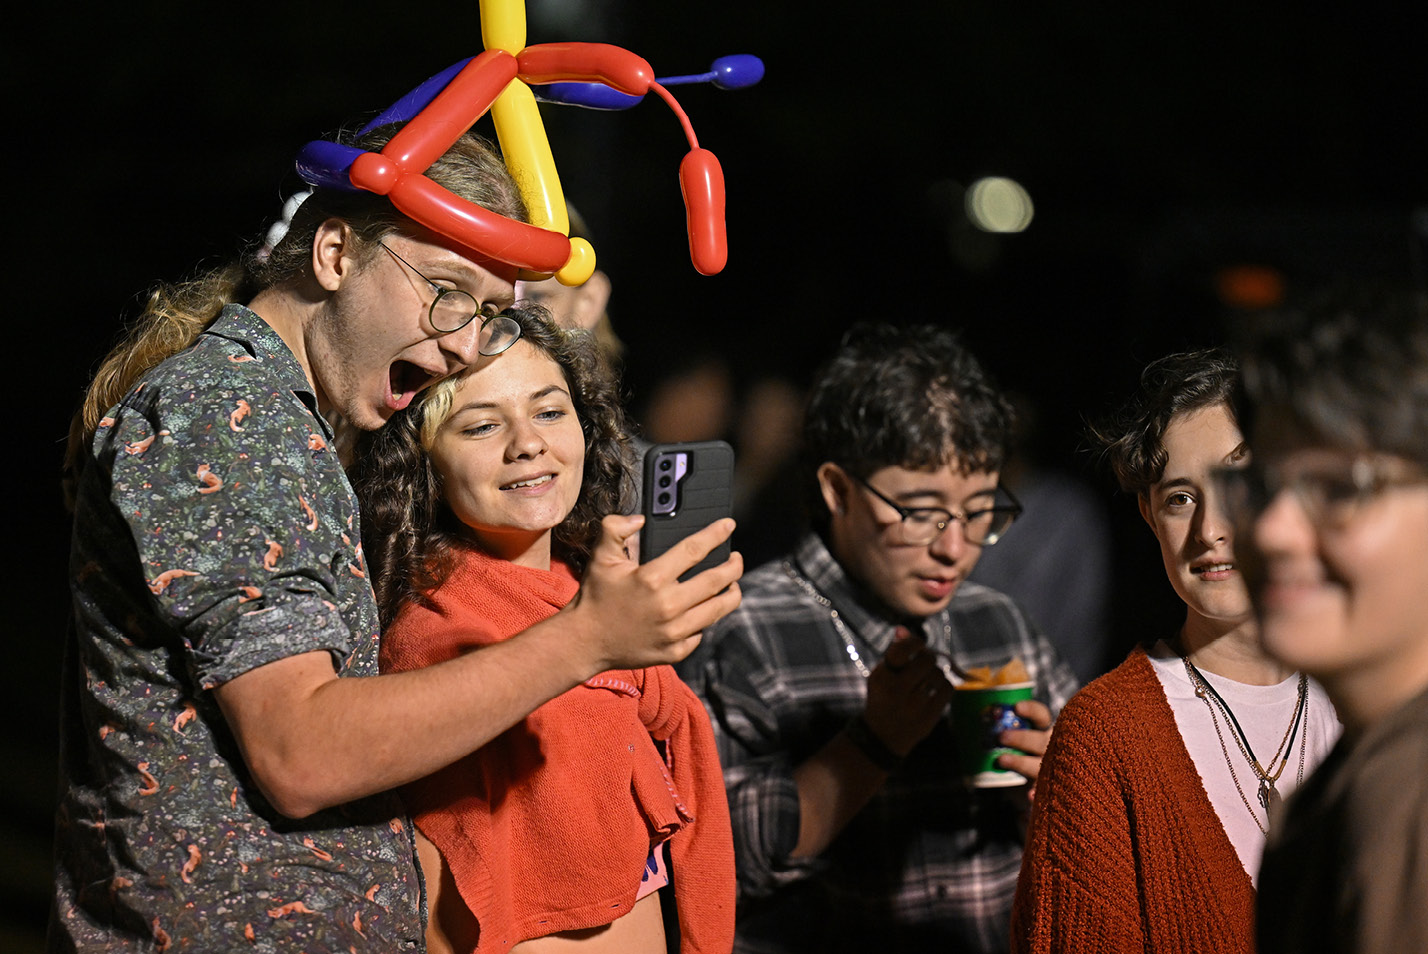 Students with balloon hats pose for selfies